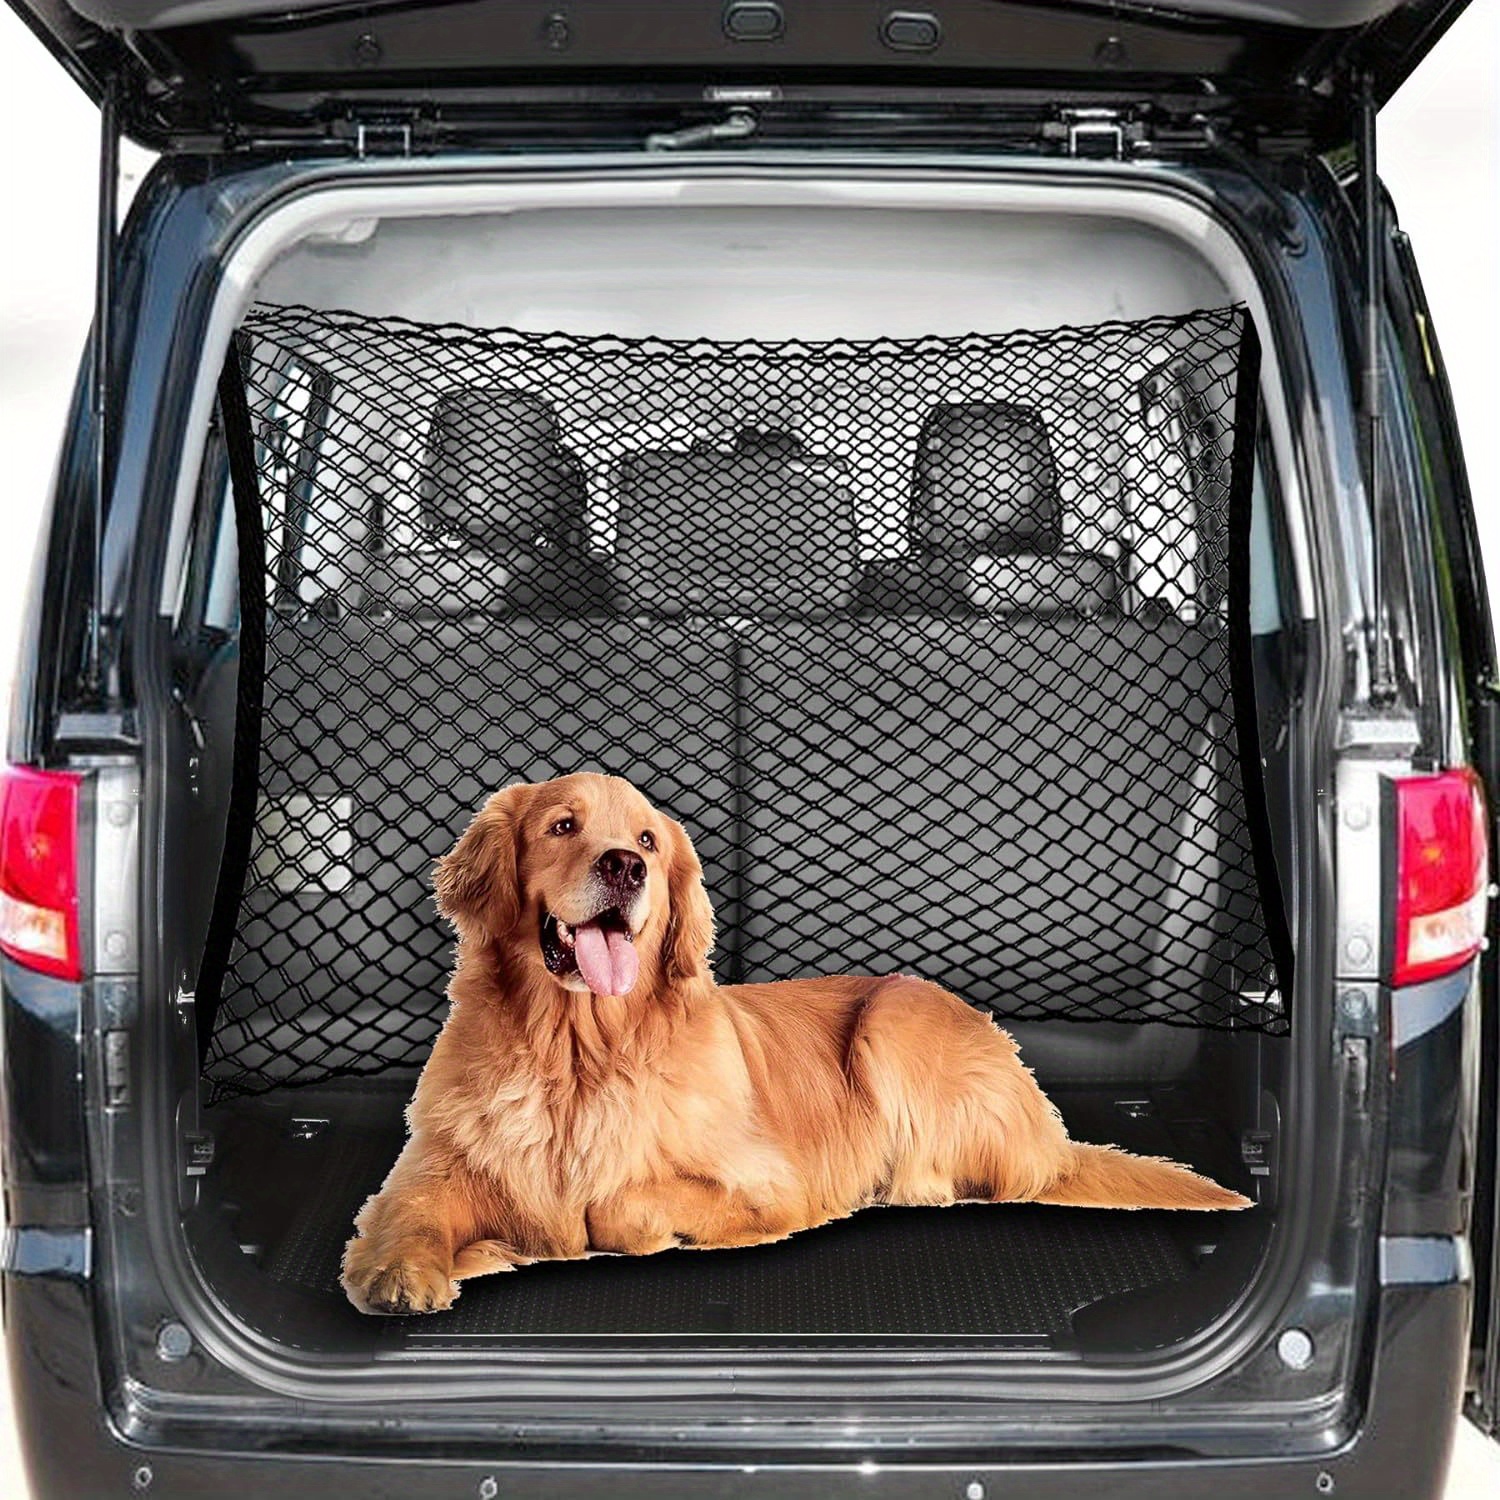 

Adjustable Dog Car Barrier With Bungee Cords - Dual Layer Nylon Net For Cars, , Suvs, Trucks - Easy Install, 47.21x33.82 Inches